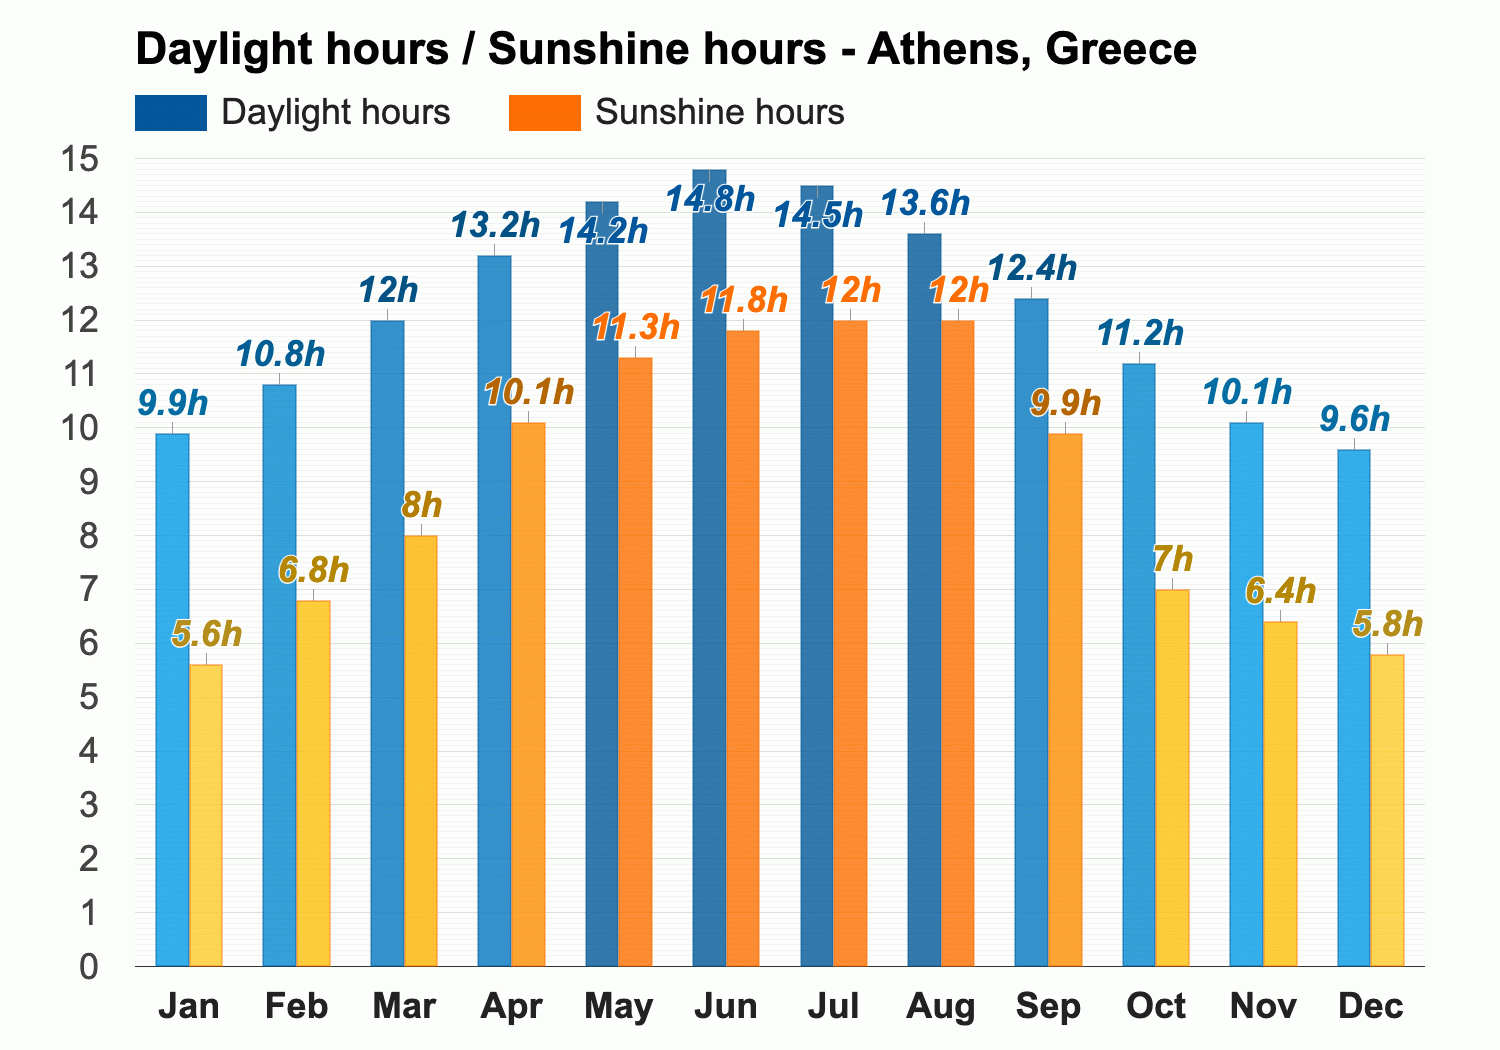 Athens, Greece - Climate & Monthly weather forecast